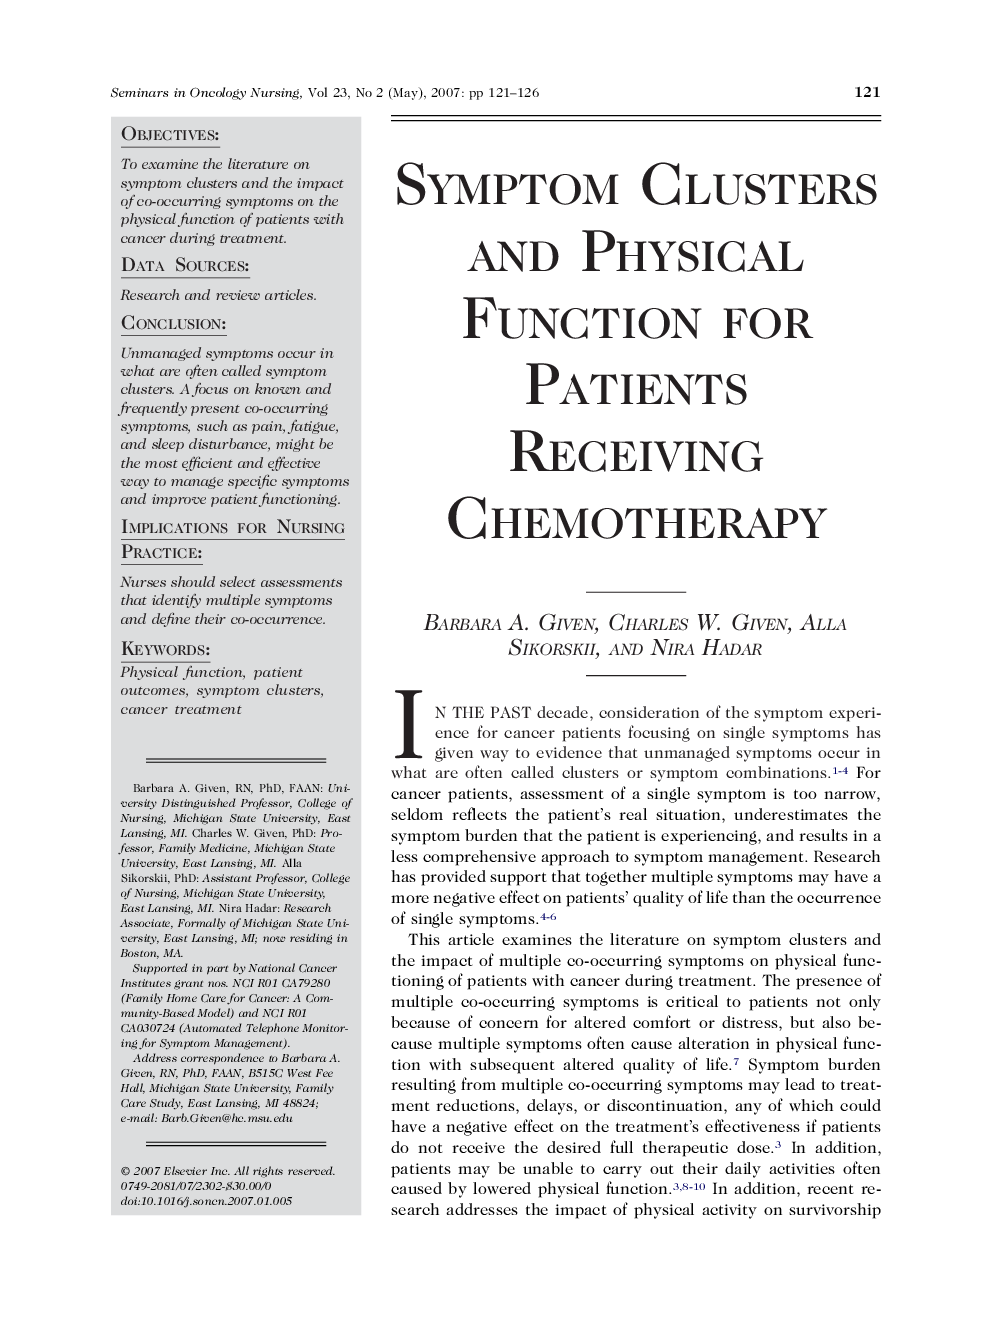 Symptom Clusters and Physical Function for Patients Receiving Chemotherapy 